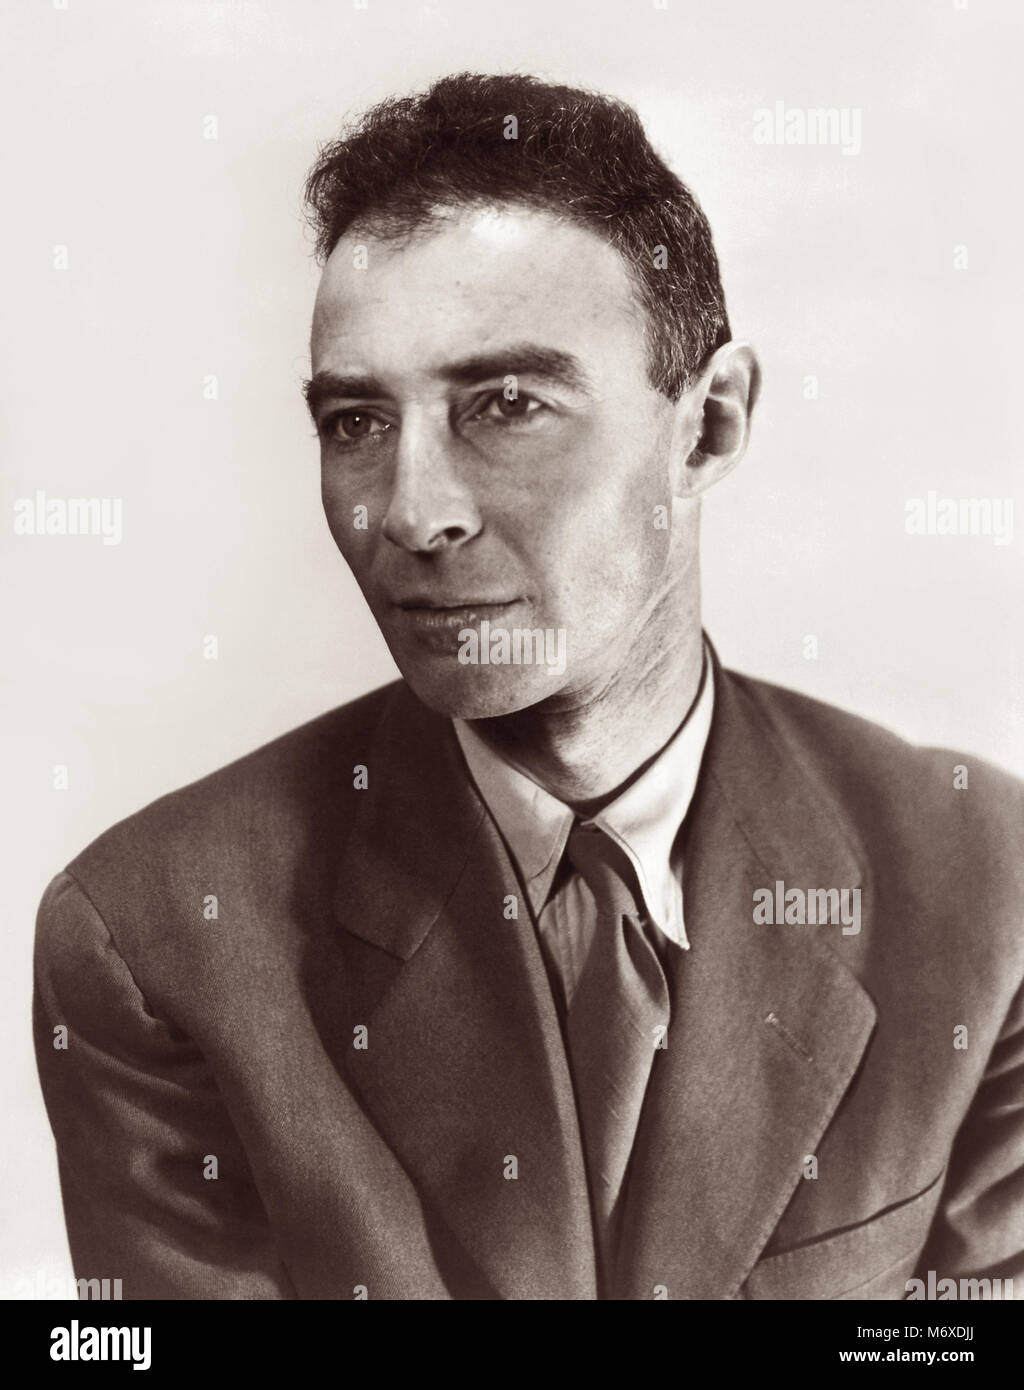 J. Robert Oppenheimer (1904–1967) was an American theoretical physicist and participant in the Manhattan Project's development of the atomic bomb during World War II as wartime head of the Los Alamos Laboratory in New Mexico. Stock Photo